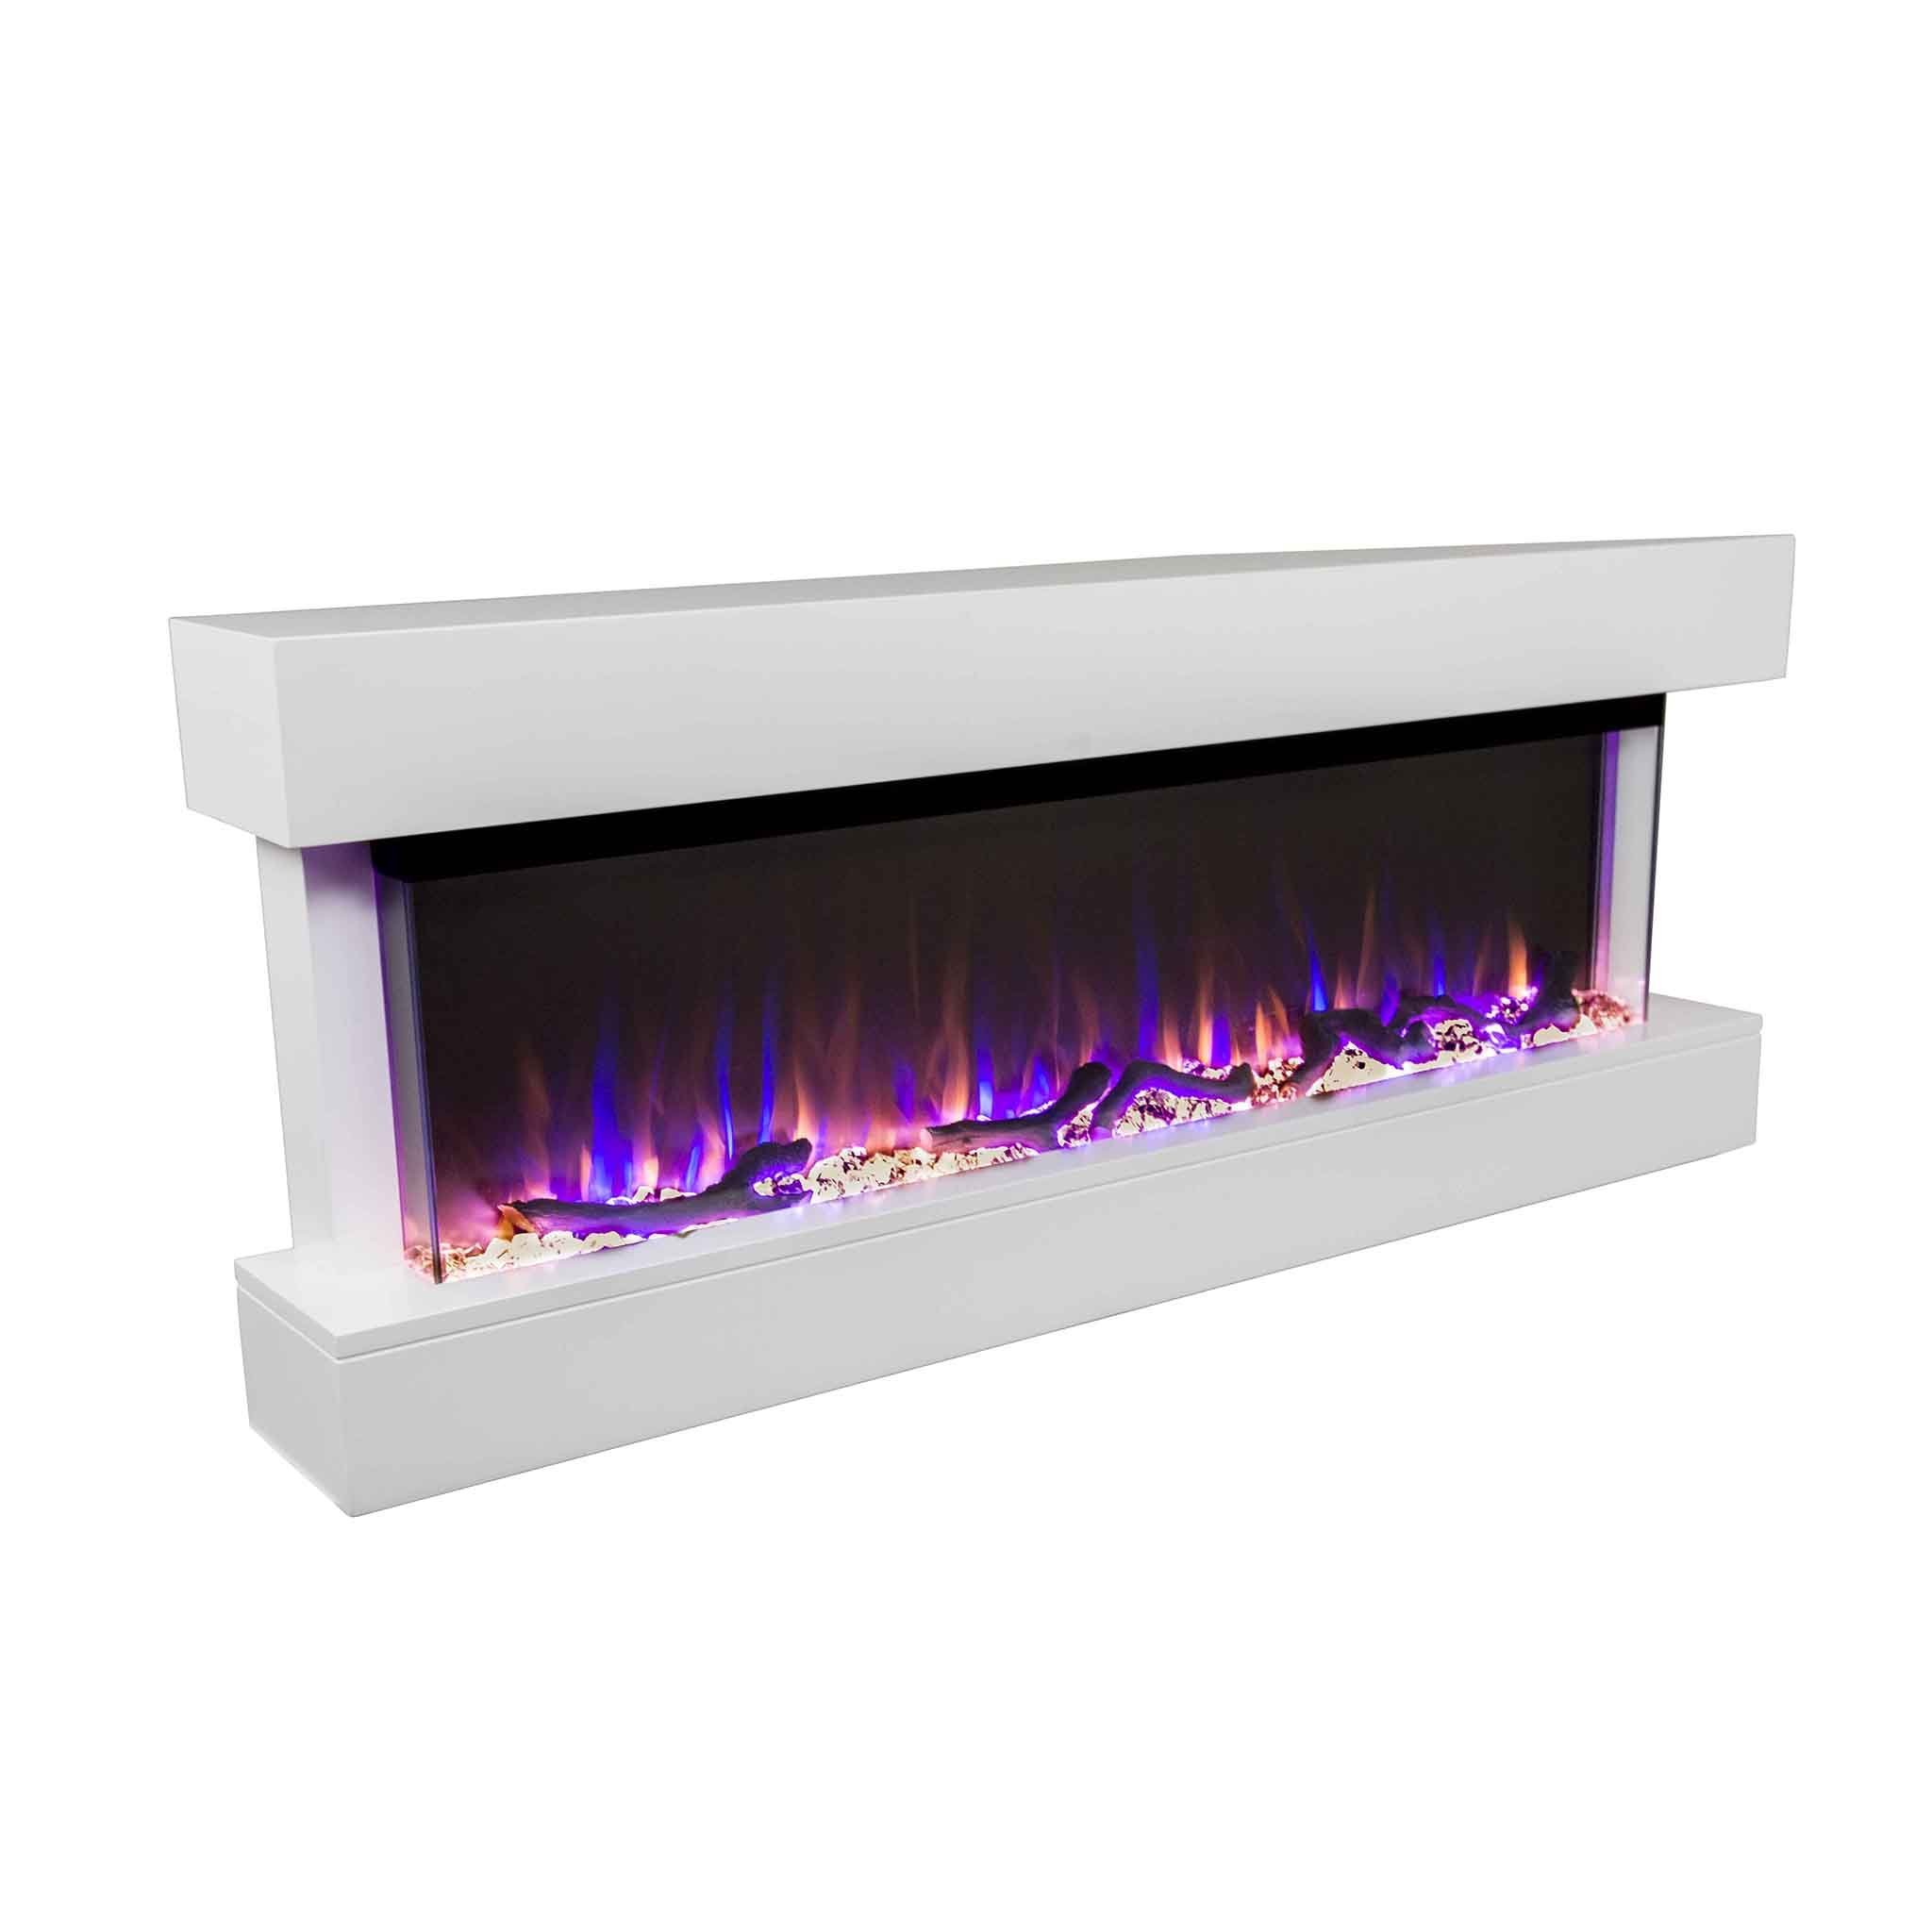 Chesmont White 80033 Wall Mount 3-Sided Smart Electric Fireplace shown up close at an angle.